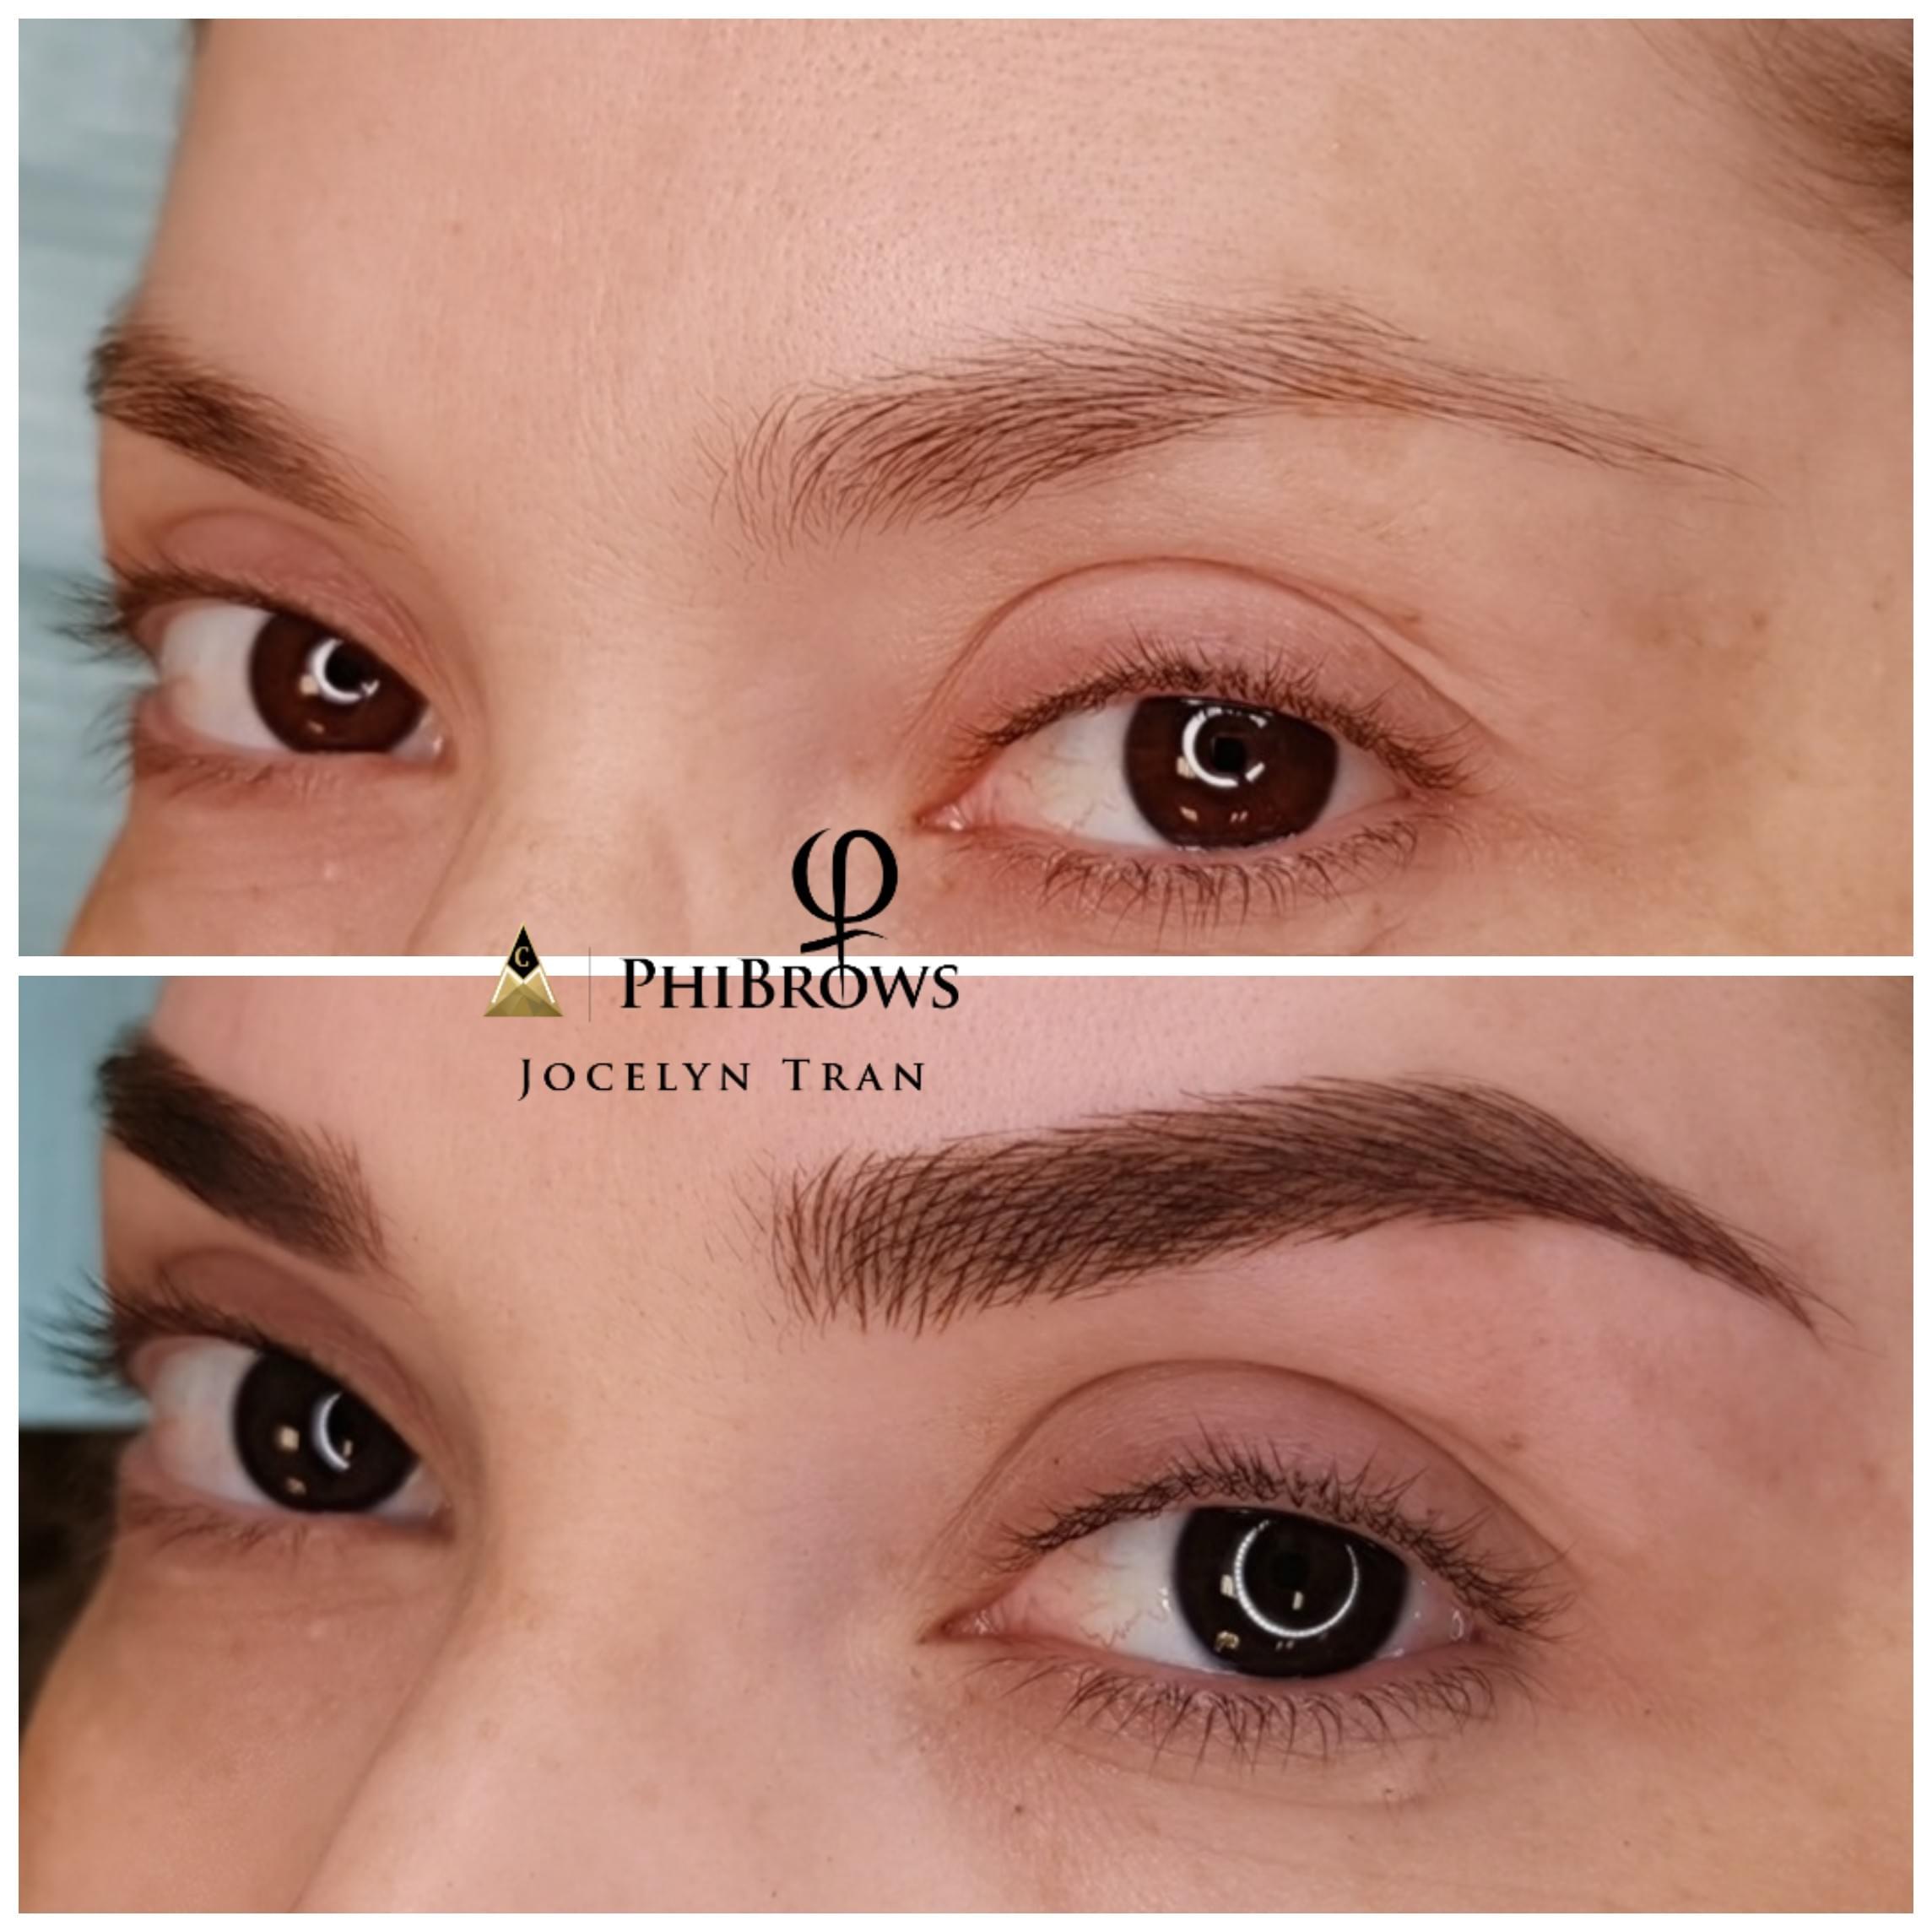 Phibrows microblading before and after